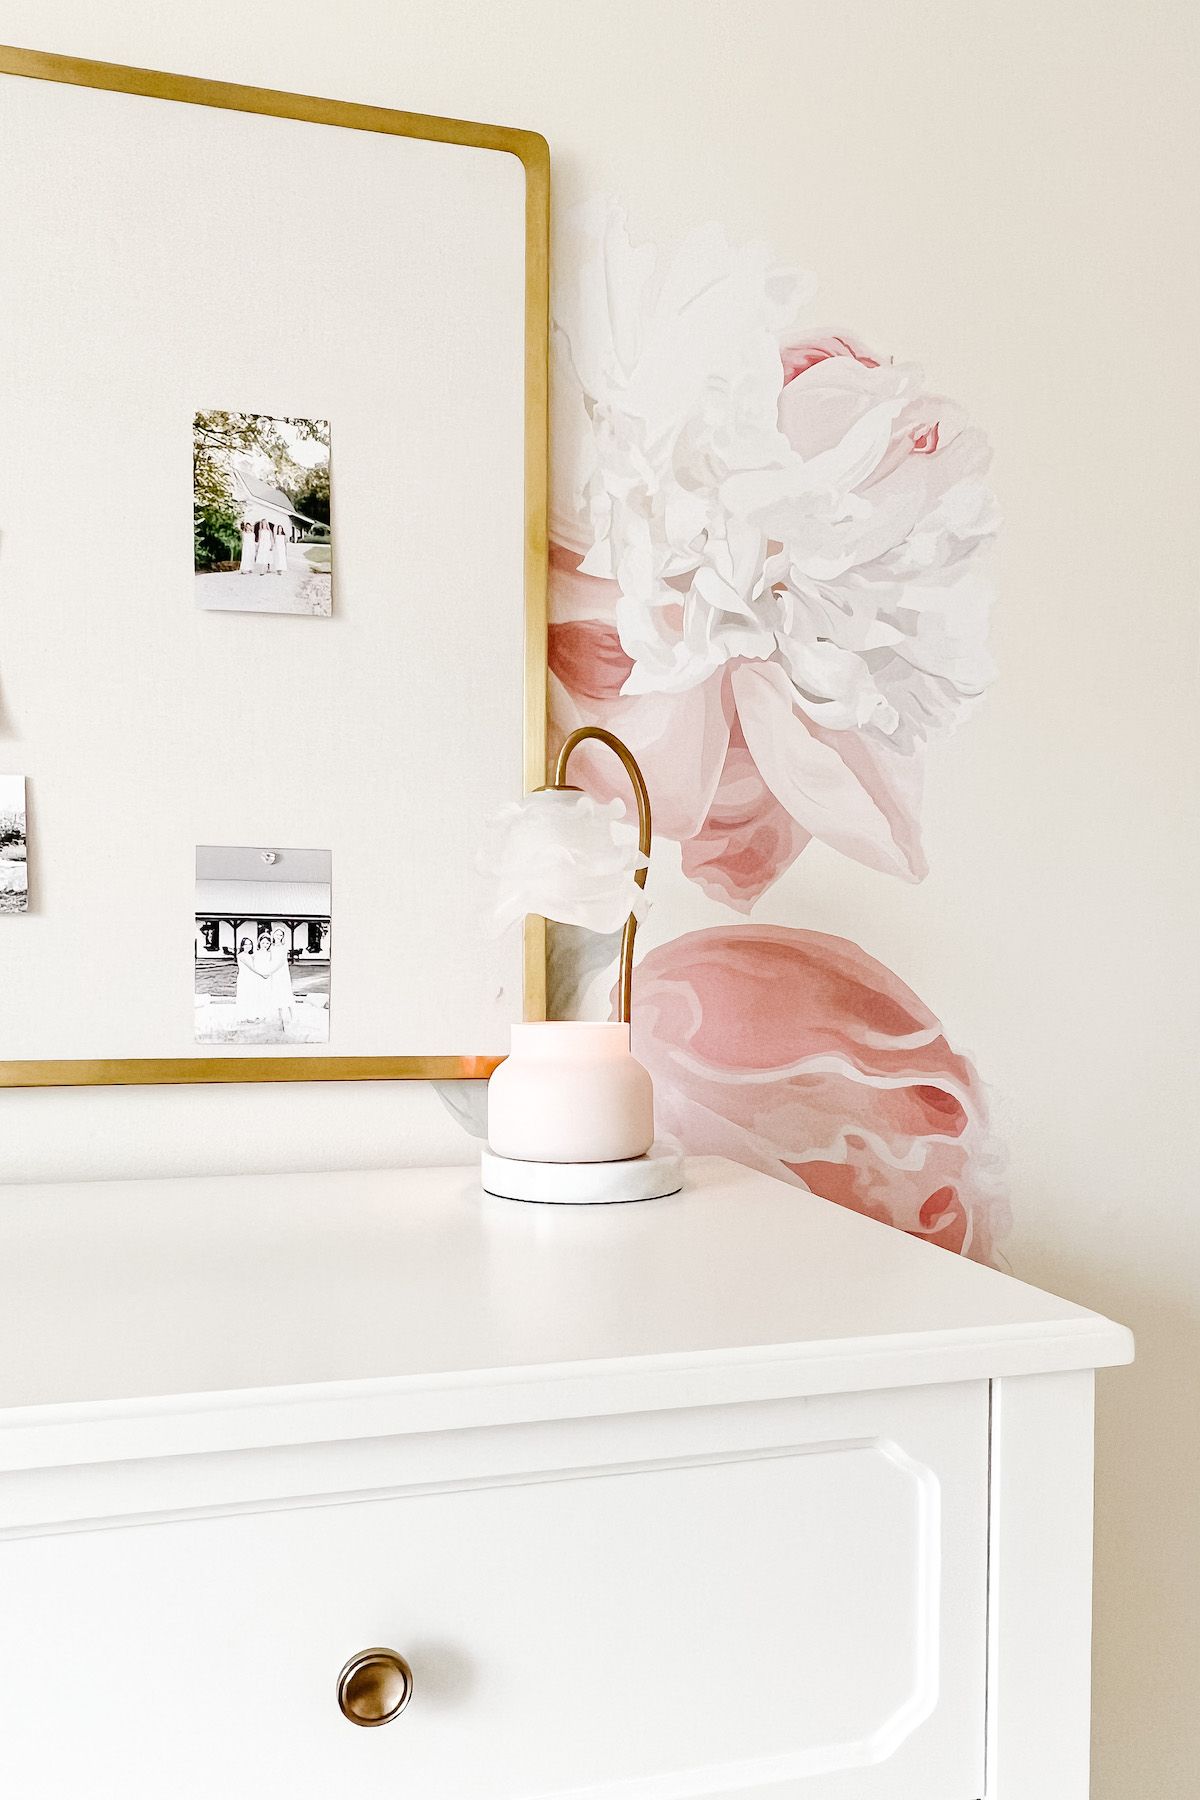 A girl's room with white furniture, a pink floral wallpaper, and a candle warmer Amazon gadget on the dresser.